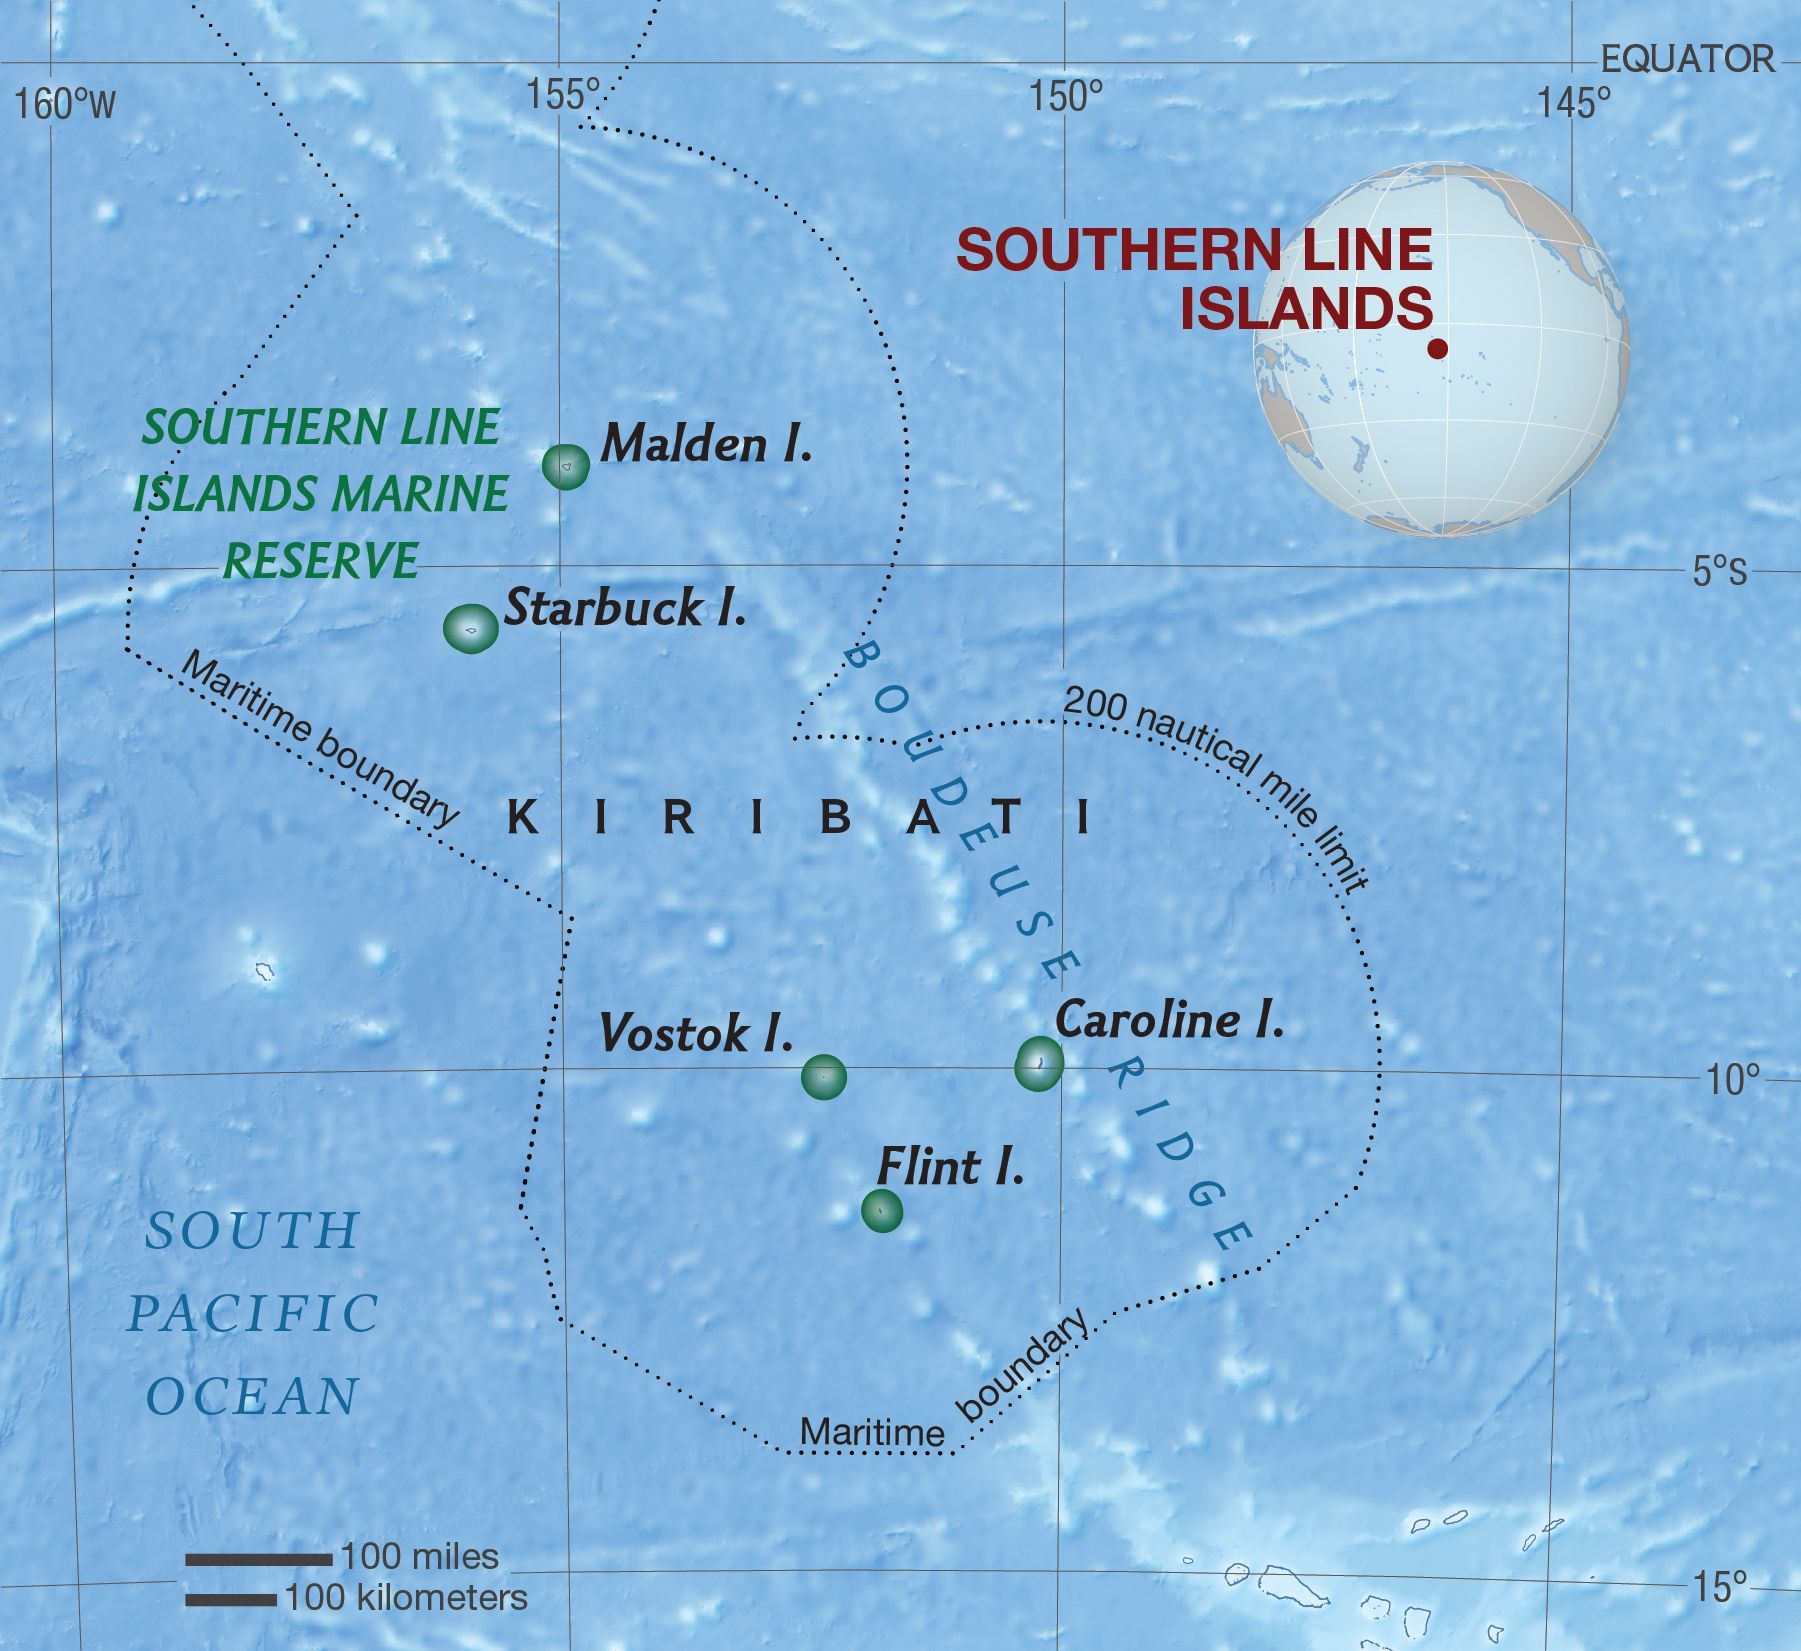 Southern Line Islands